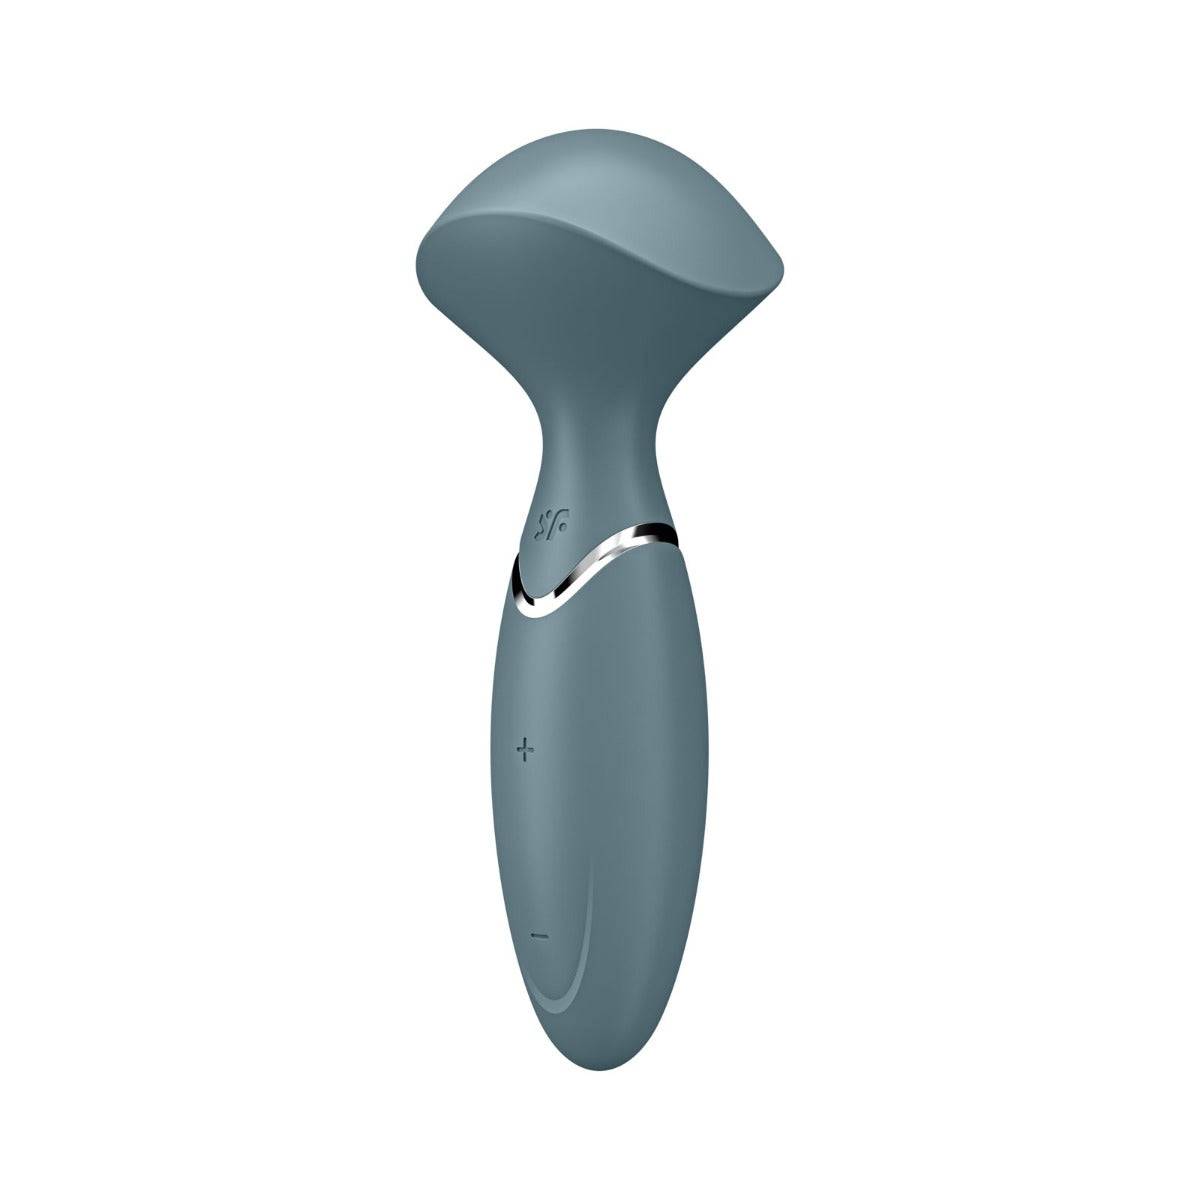 Front View Product - Satisfyer Mini Wand-er Wand Vibrator Stone Grey